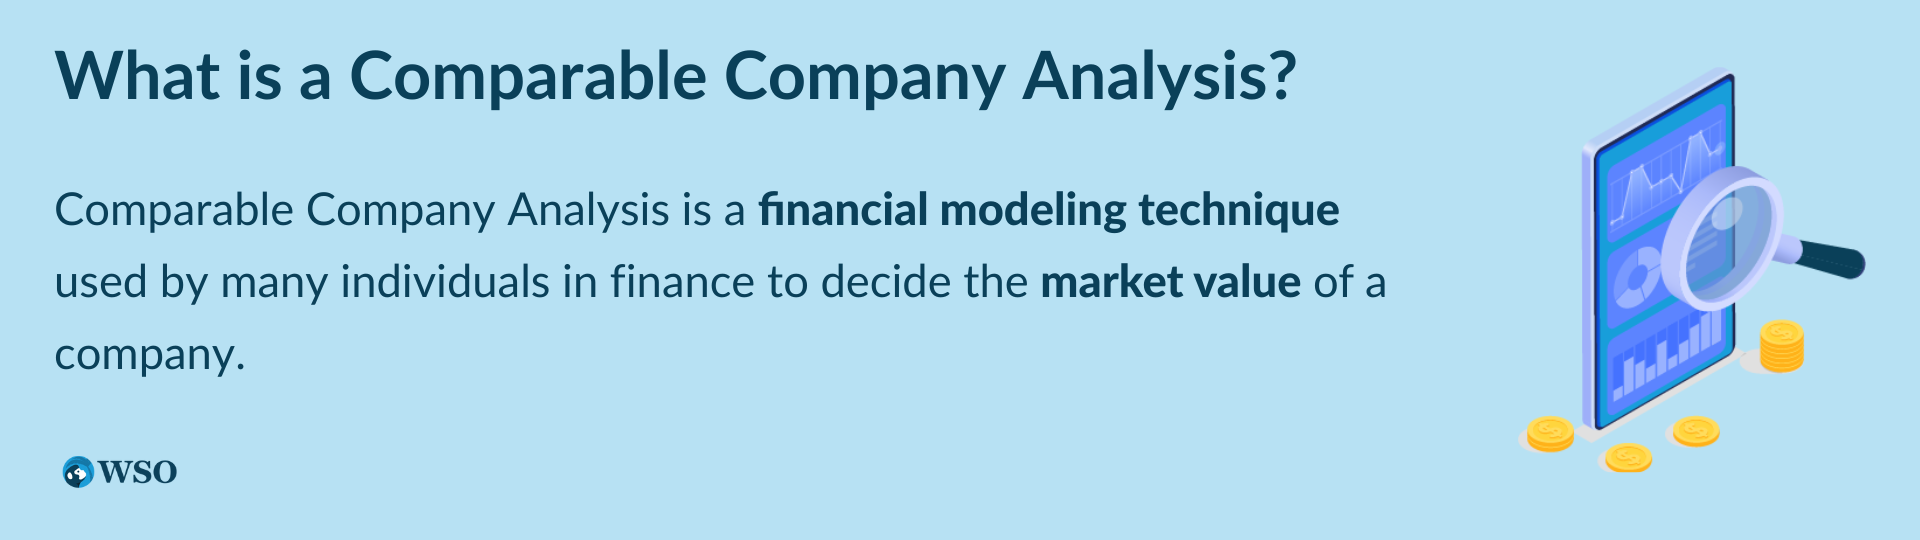 What is a Comparable Company Analysis